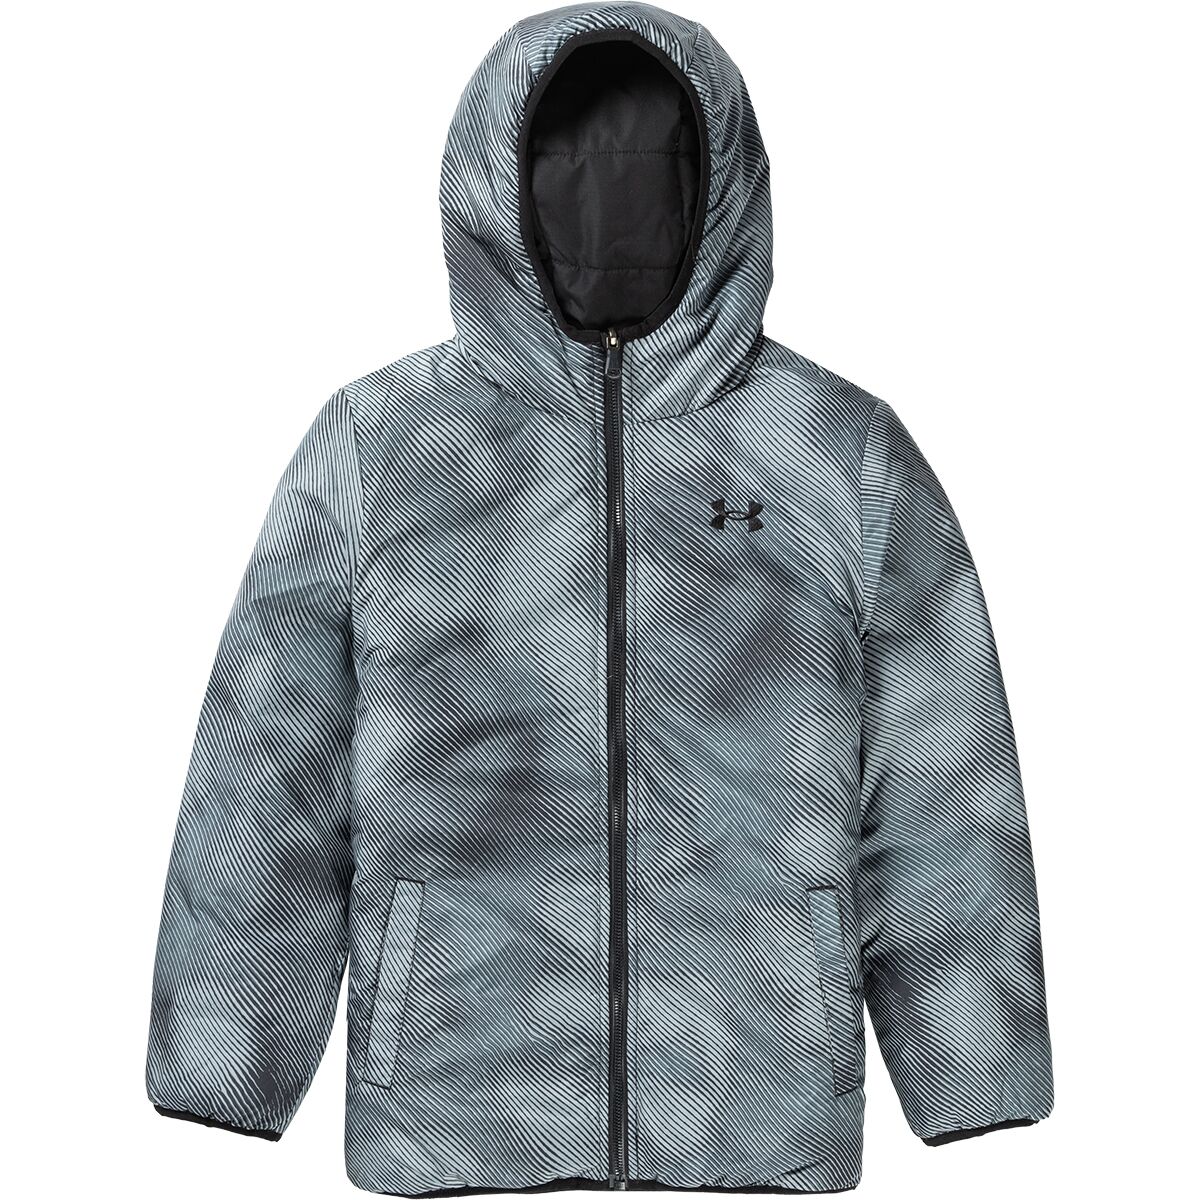 Under Armour Reversible Pronto Puffer Jacket - Boys'